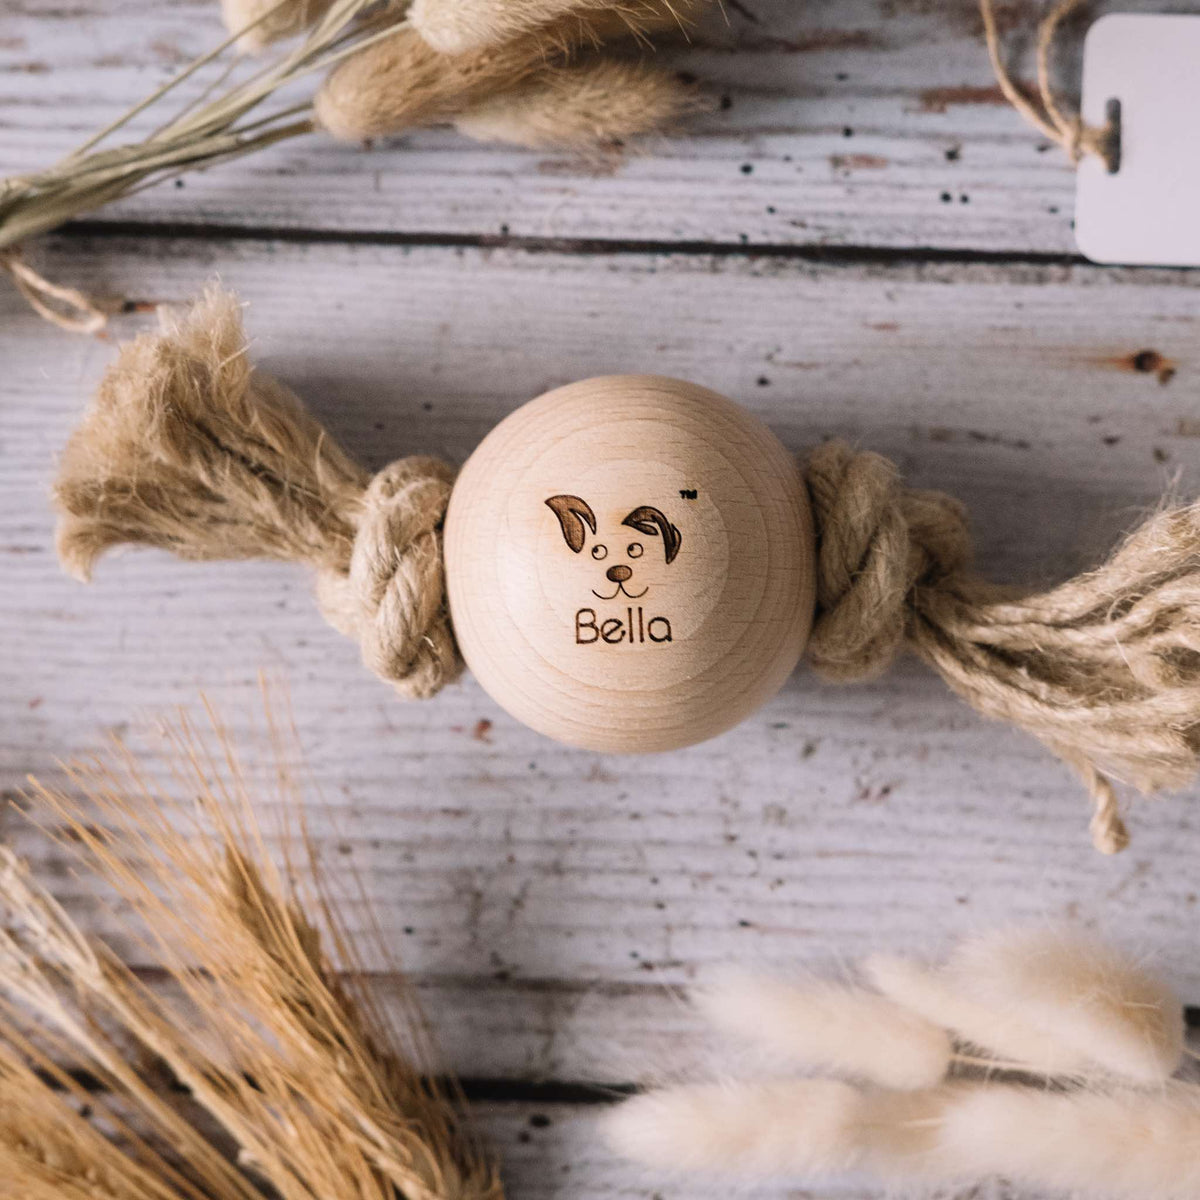 One Ball - Smug Mutts Natural Hemp Rope and Beech Wood Dog Toy, Two Knots Hold the Ball in Place, Natural and Eco Friendly Dog Toy